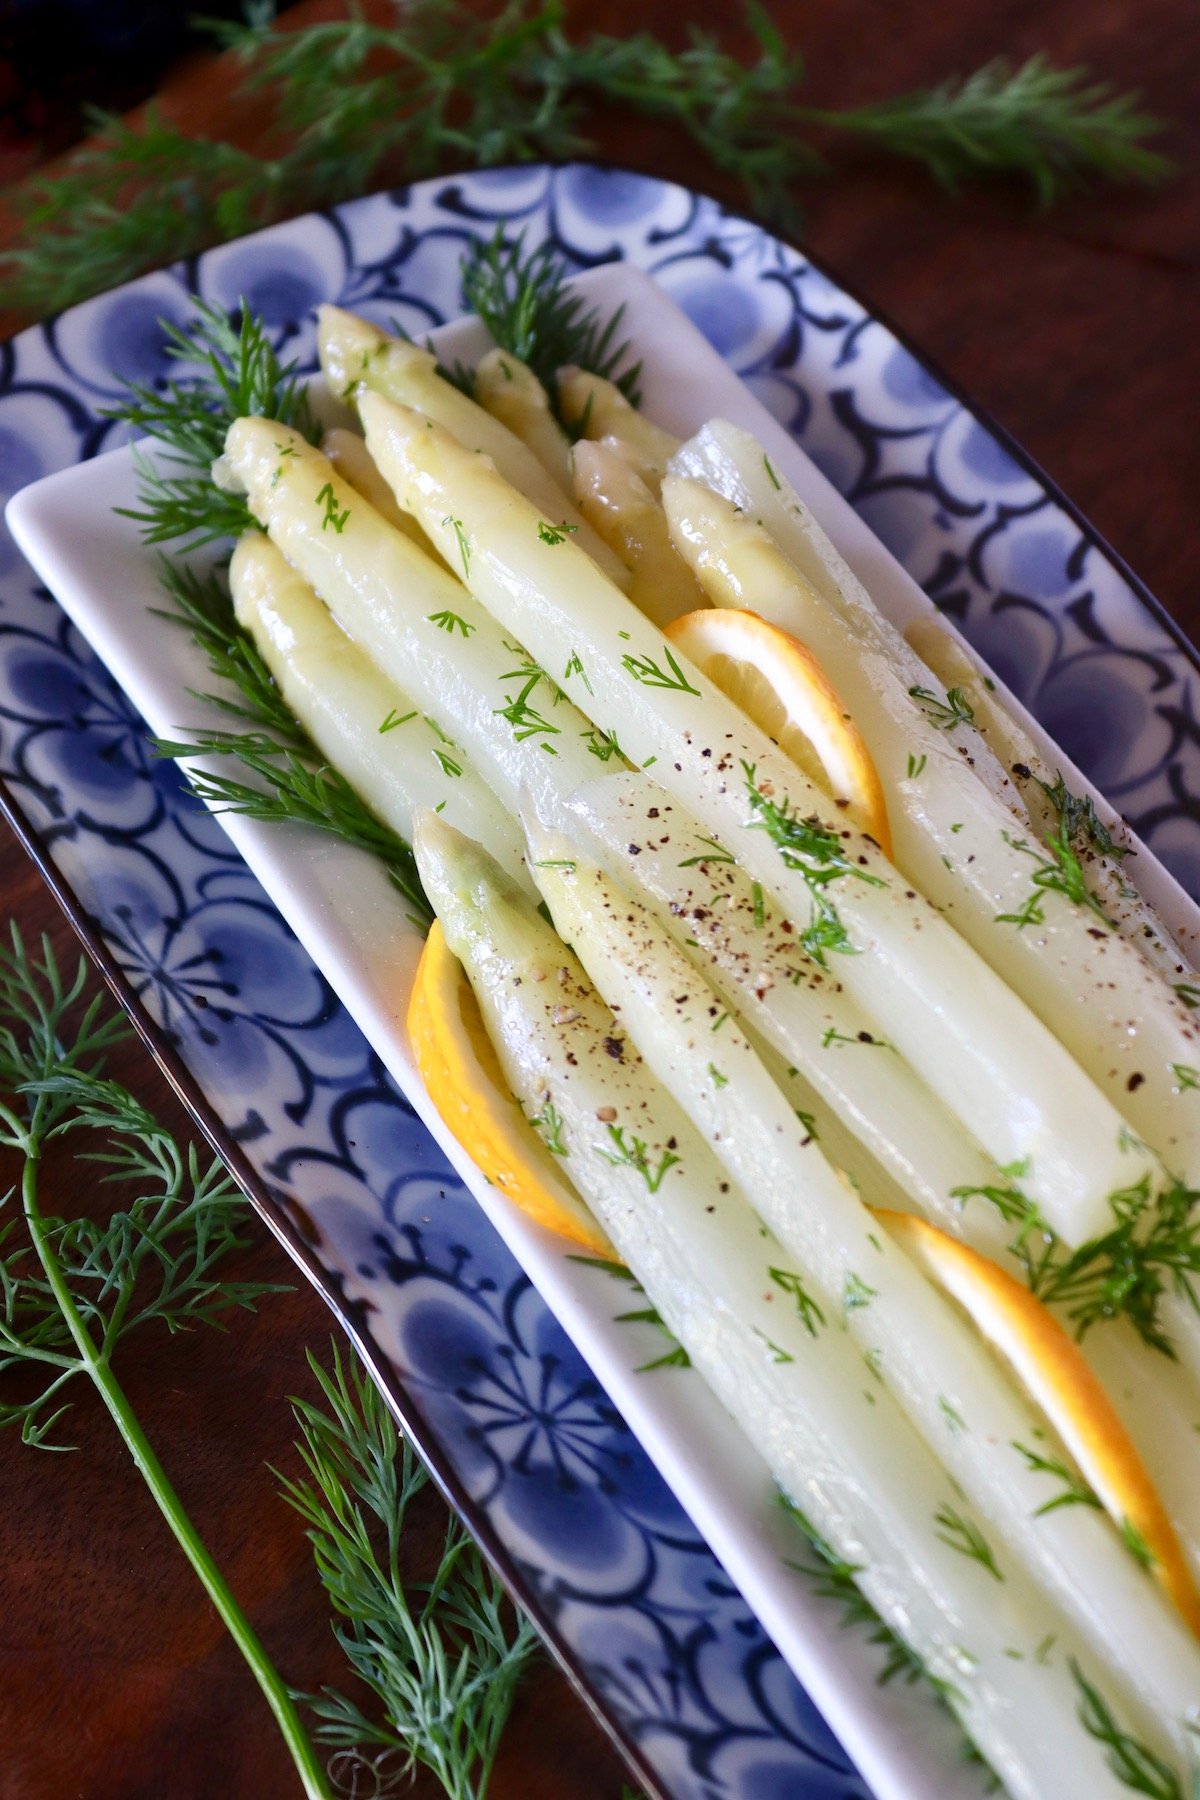 White asparagus spears on a rectangular place with fresh dill and lemon slices.